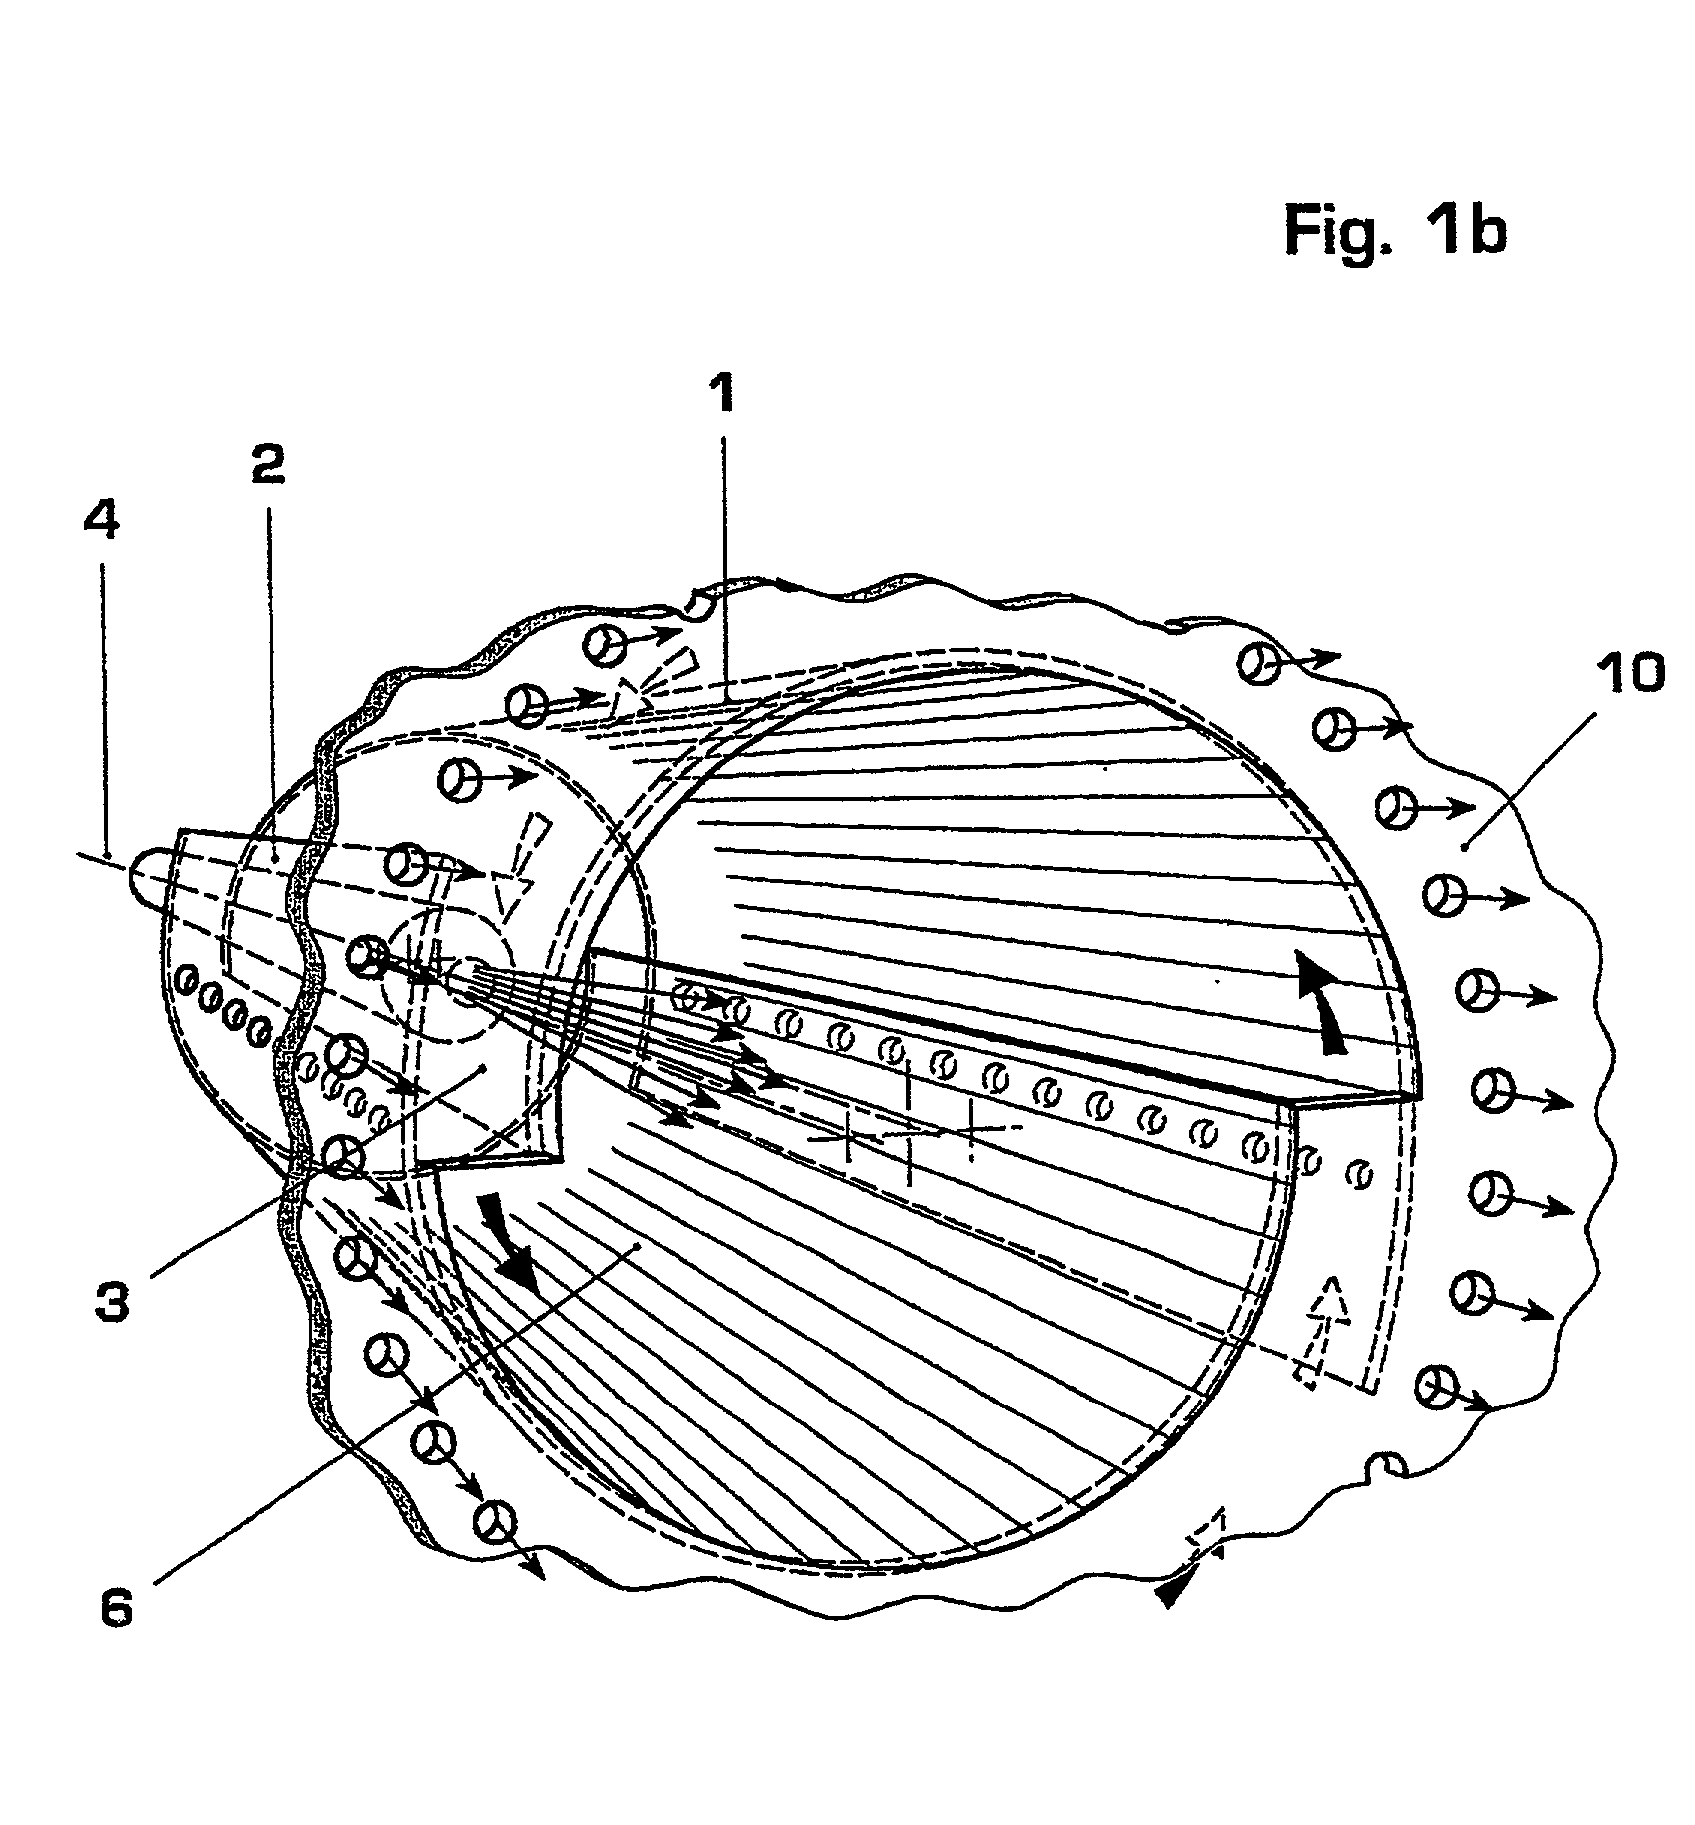 Method for increasing the fluid-mechanical stability of a premix burner as well as a premix burner for performing the method